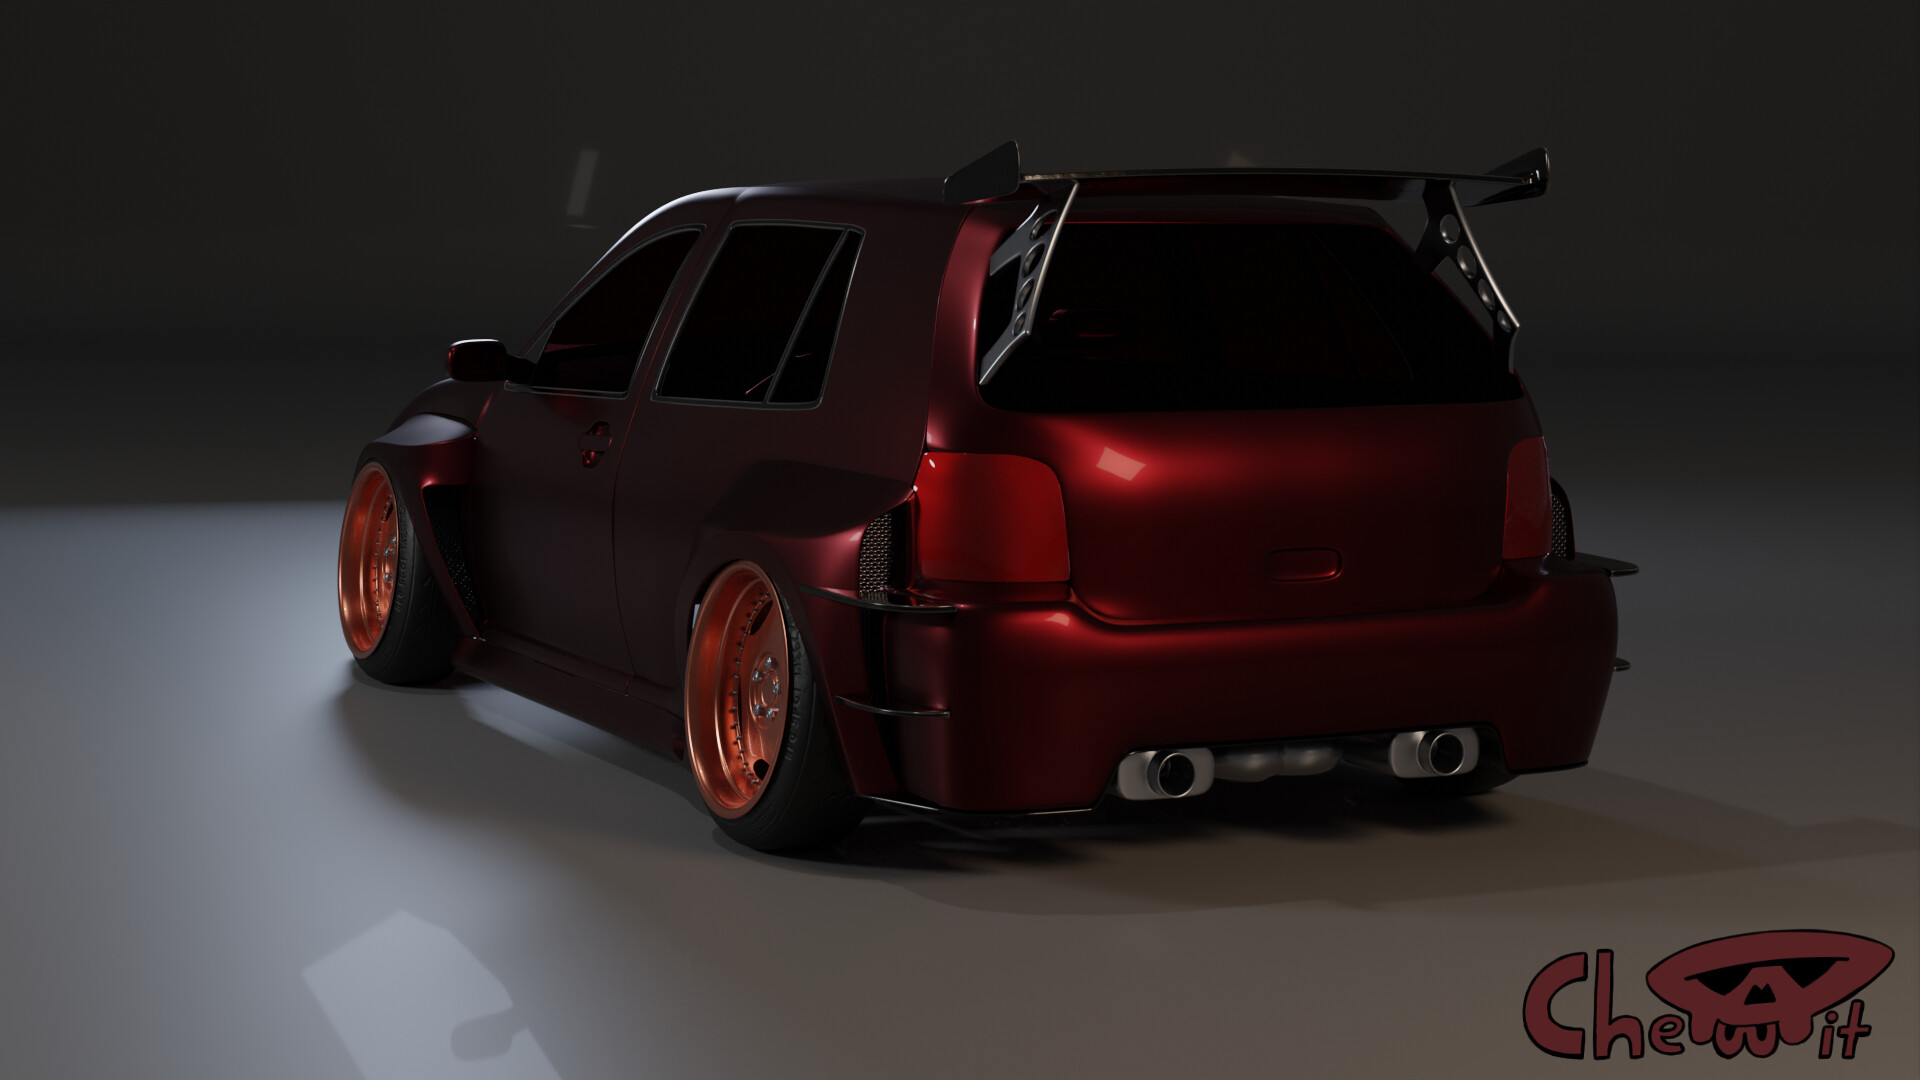 VW Golf mk4 Tuning pictures - VW Tuning Mag